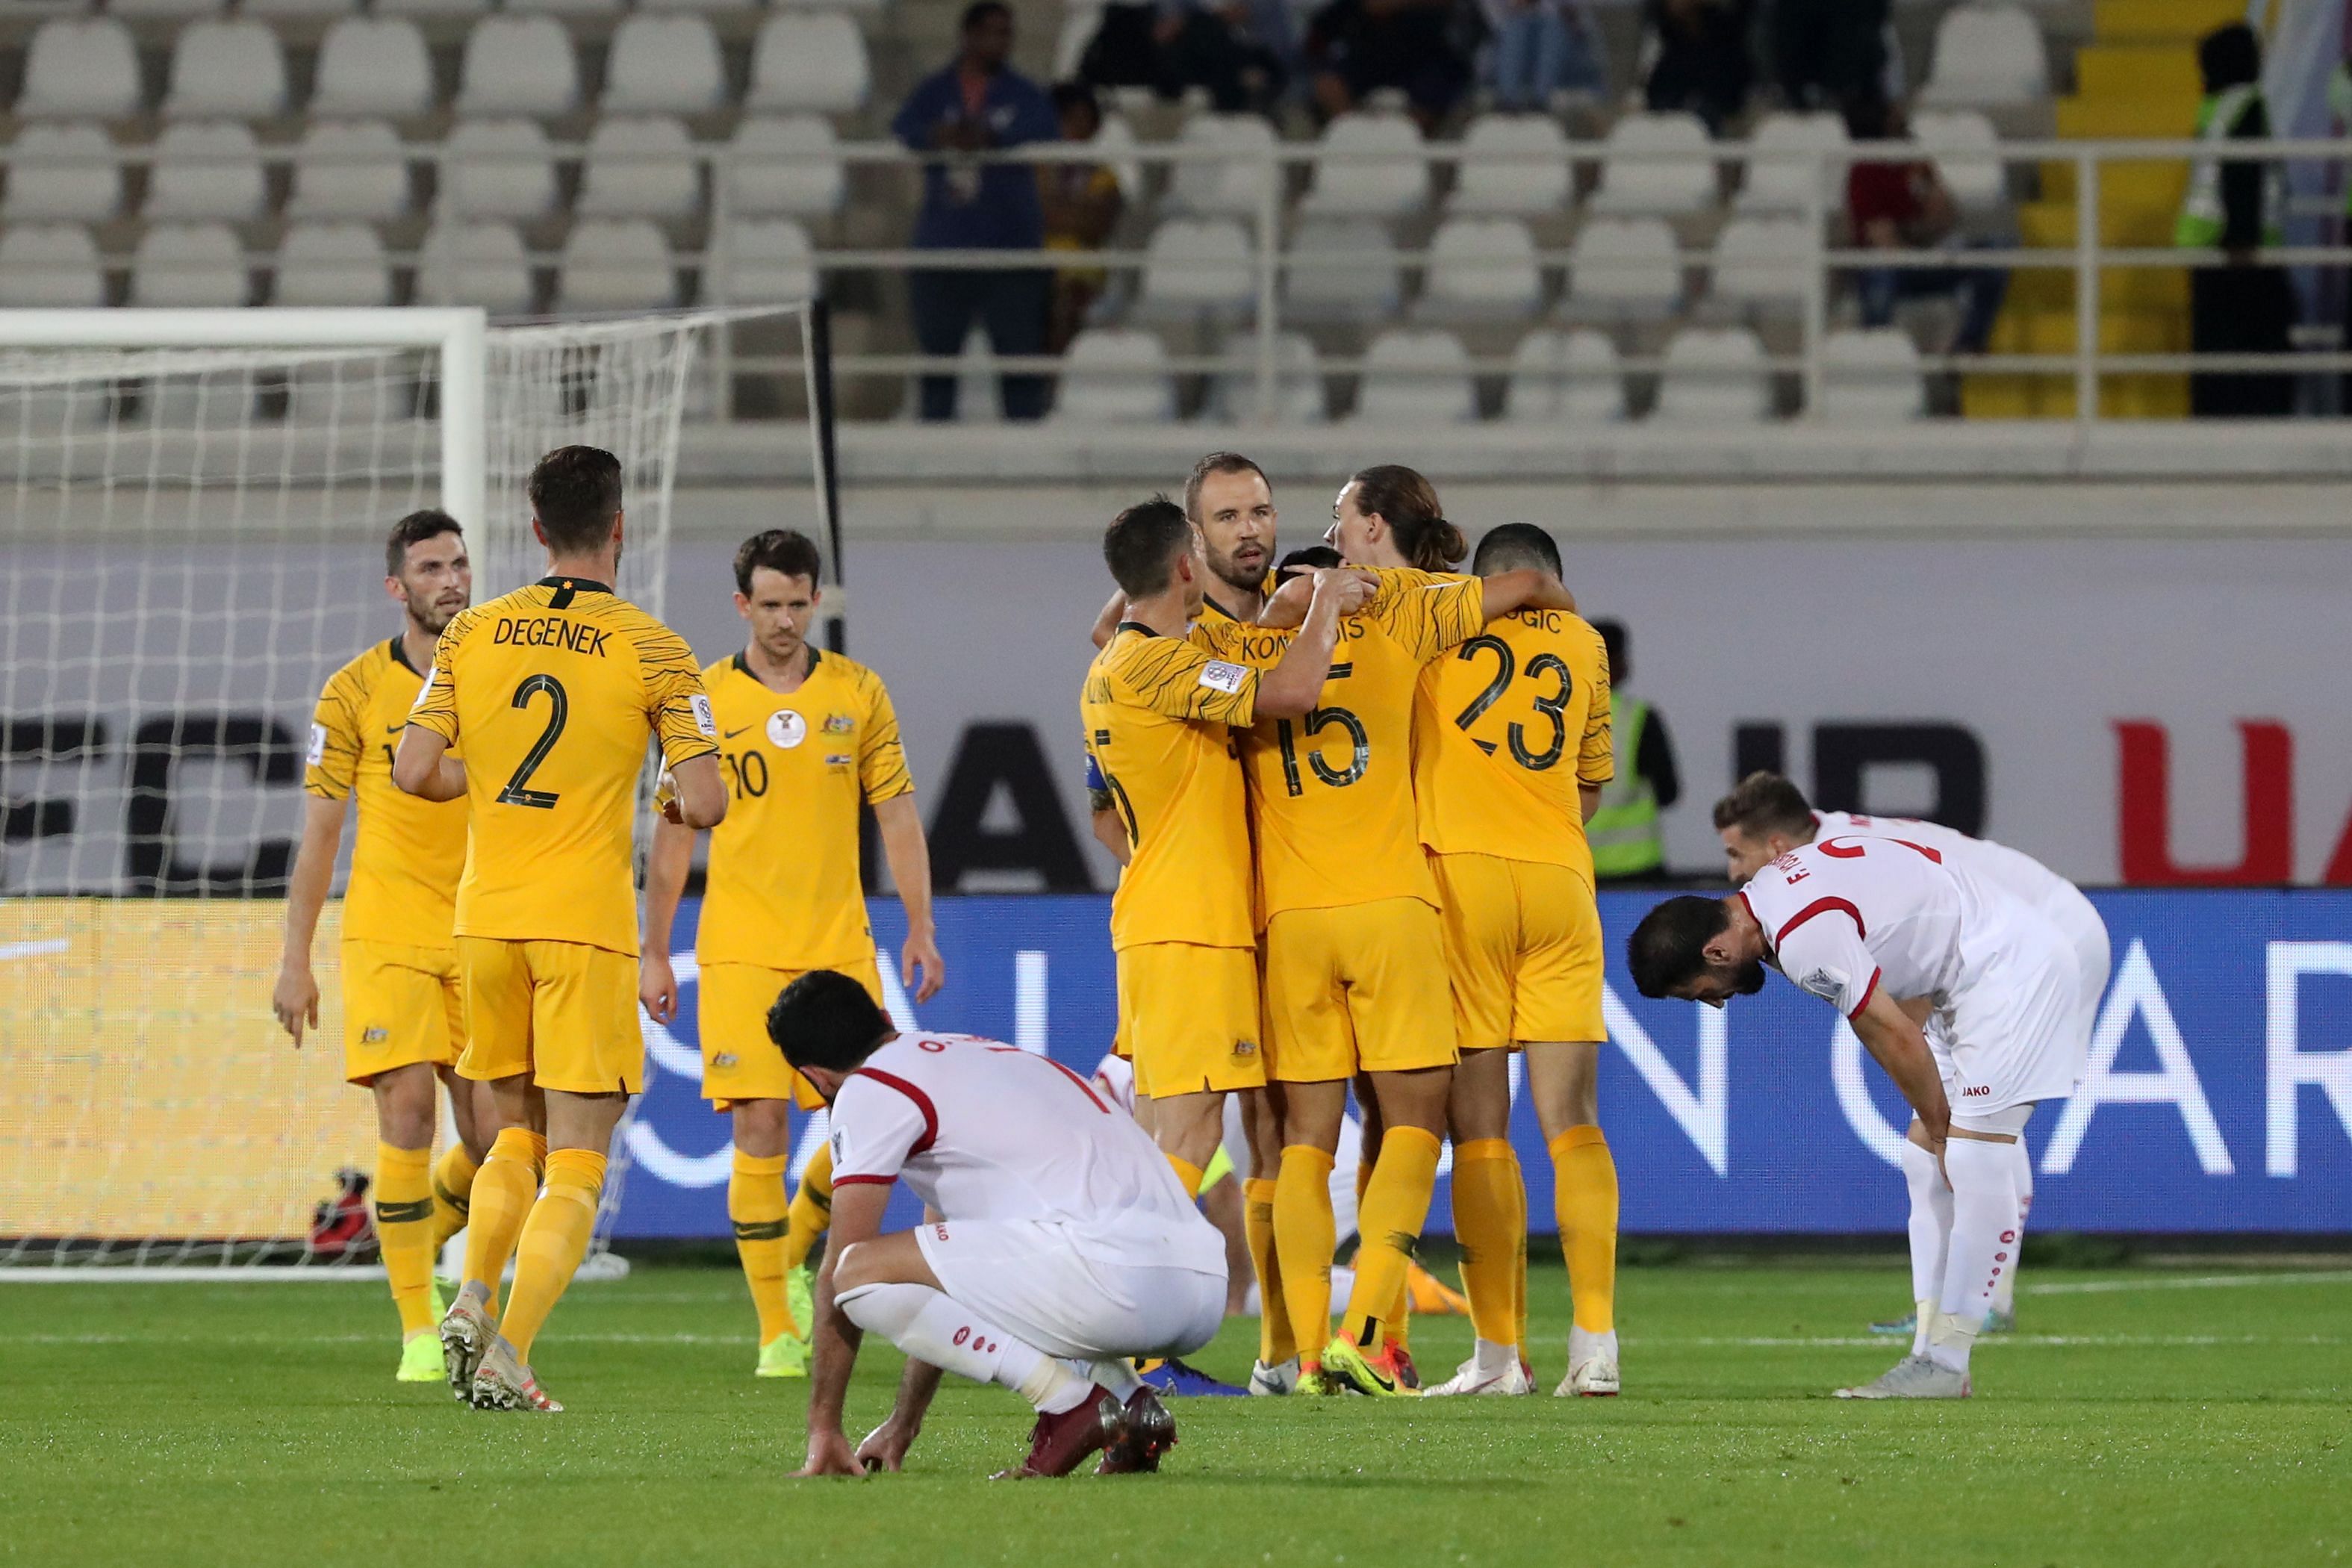 Australian players celebrate their march into the AFC Cup quarterfinals while the Syrians (in white) are downcast after exiting in the group stage. AFP